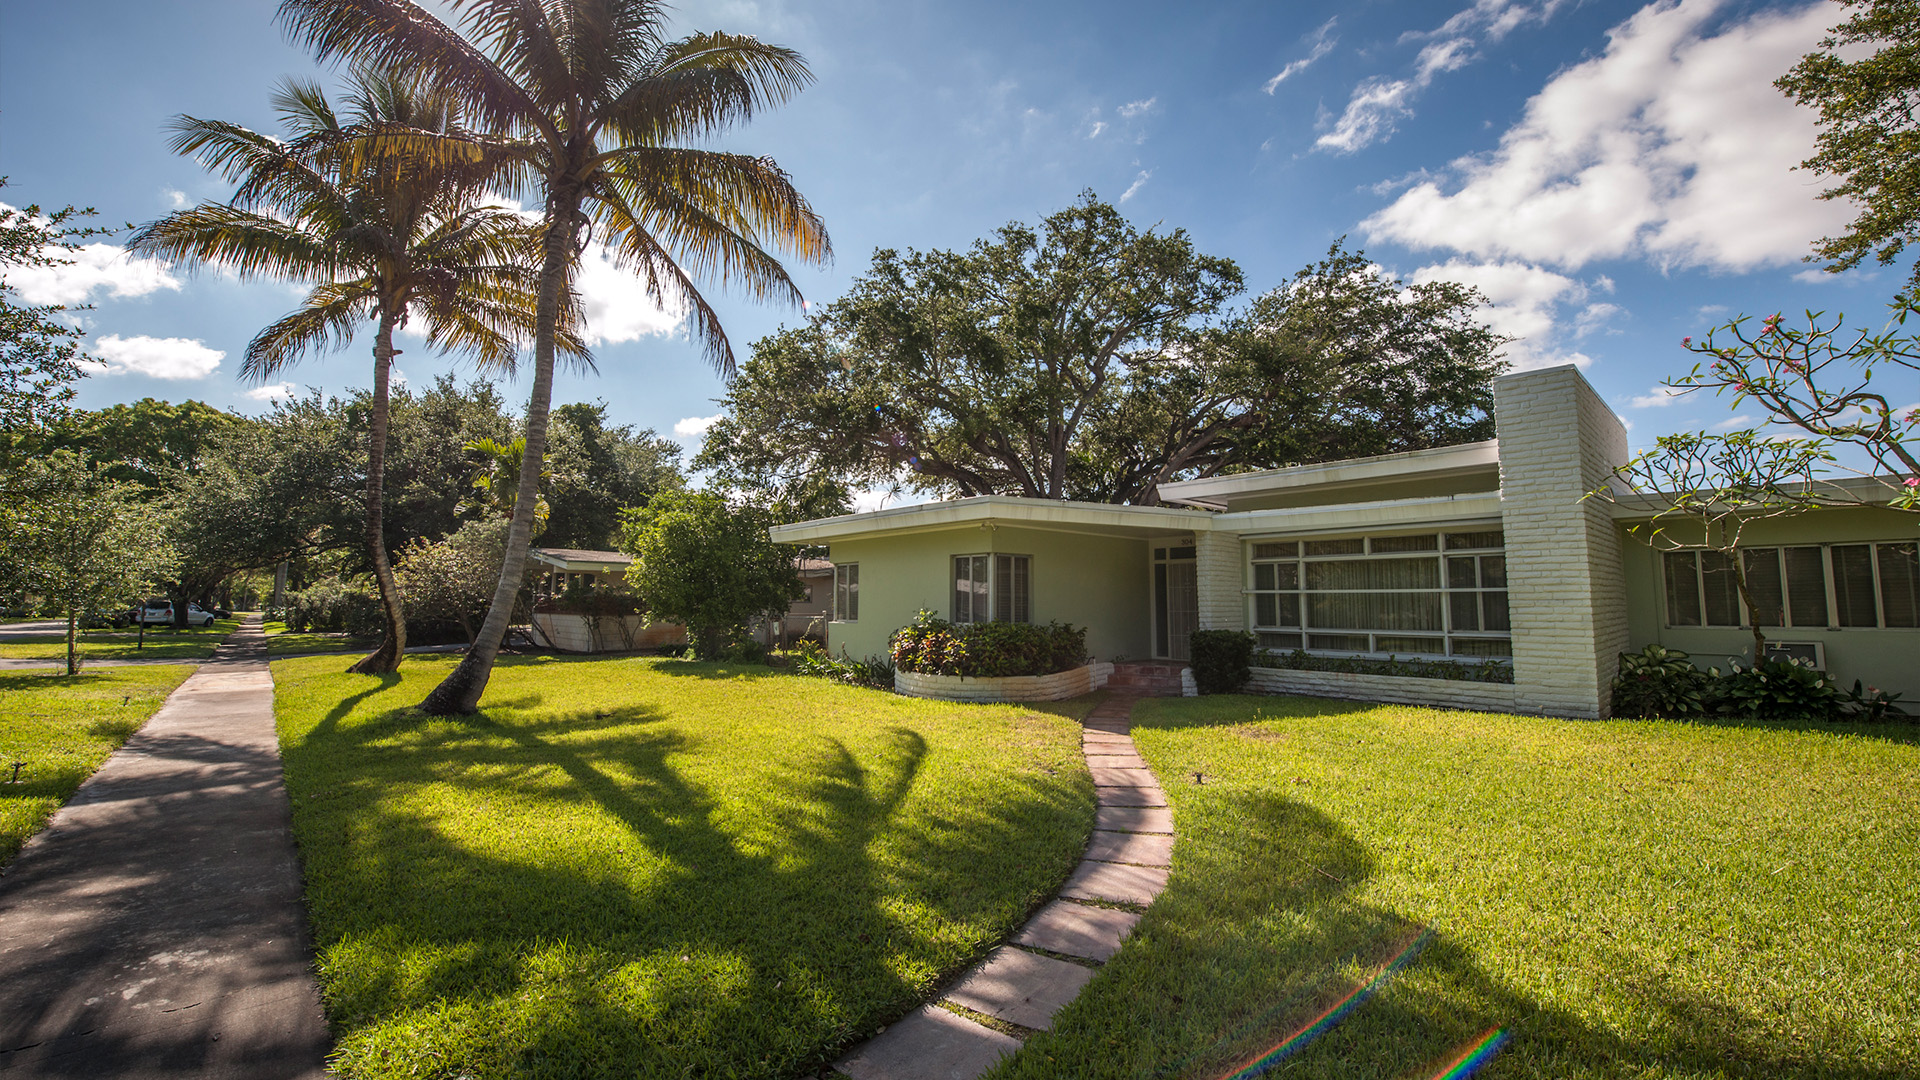 Sold Out: Miami Shores Walking Tour with John Bachay